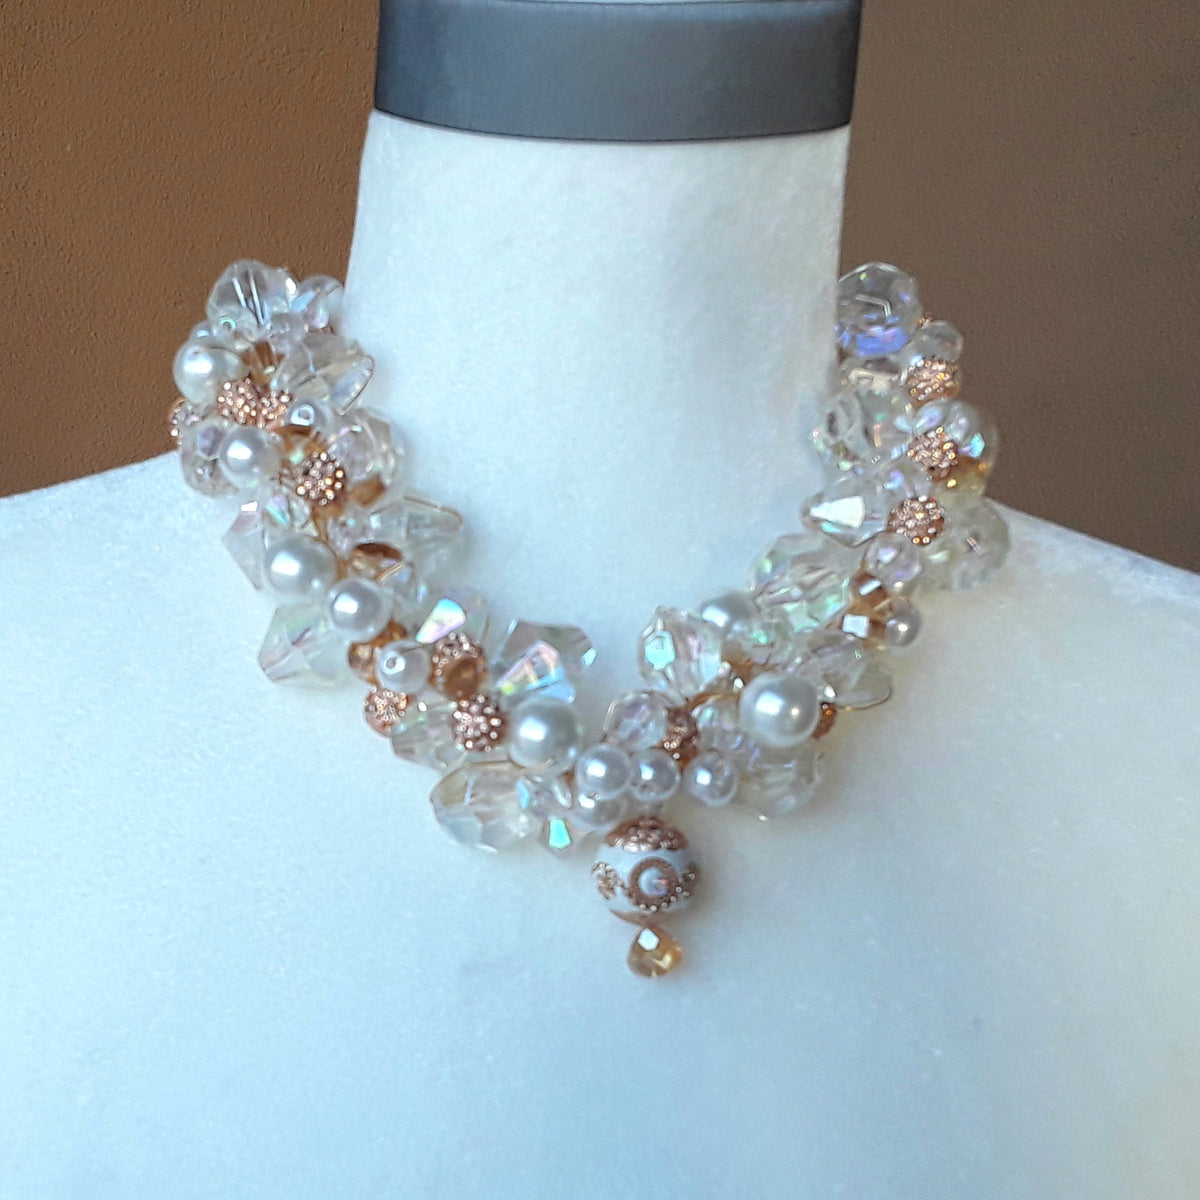 Pearl & Crystal Chunky Twisted Wire Statement Necklace, Wedding Jewelry, Holiday Party Gift